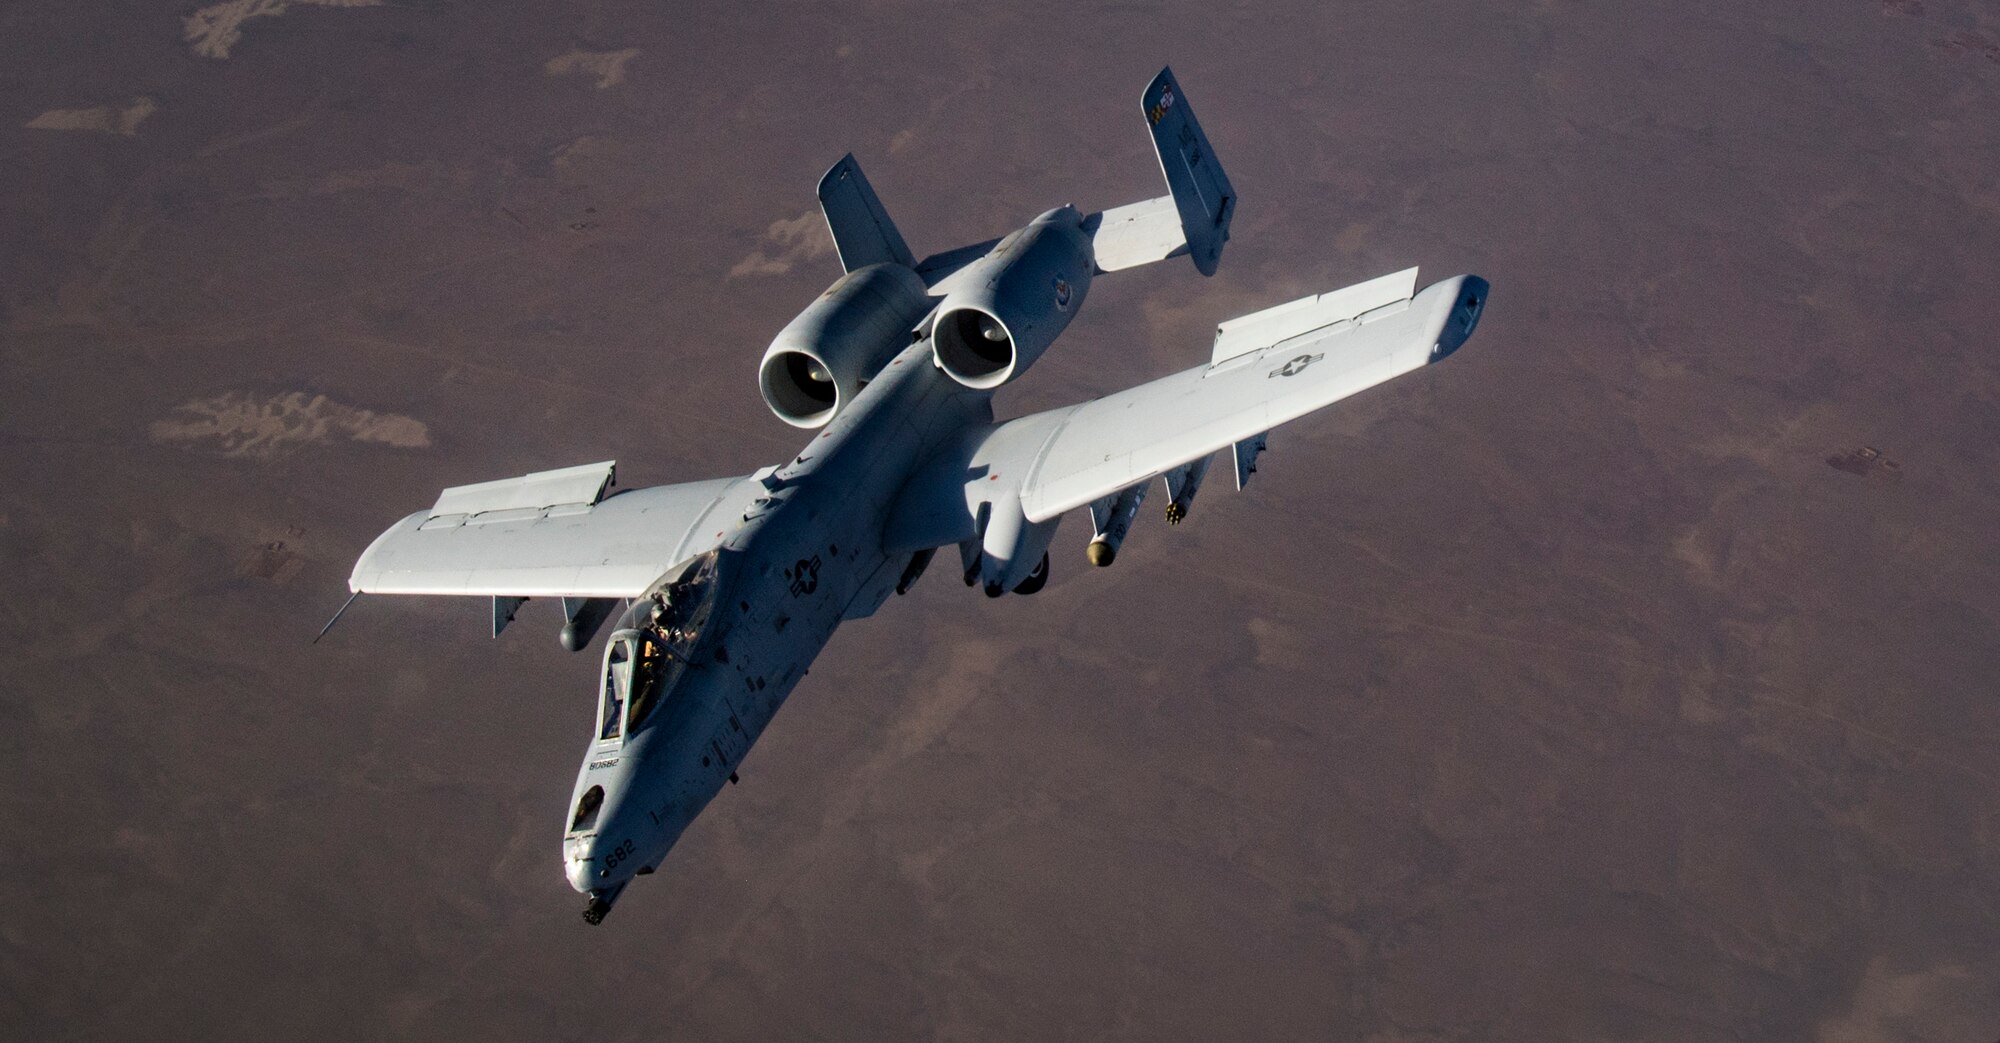 A U.S. Air Force A-10 Thunderbolt II breaks away after being refueling by a KC-135 Startotanker from the 340th Expeditionary Air Refueling Squadron over Afghanistan, Jan. 21, 2019. The 340 EARS maintain a 24/7 presence in the U.S. Central Command area of responsibility, supporting U.S. and coalition aircraft in various operations in countries such as Iraq, Syria and Afghanistan. (U.S. Air Force Photo by Staff Sgt. Clayton Cupit)